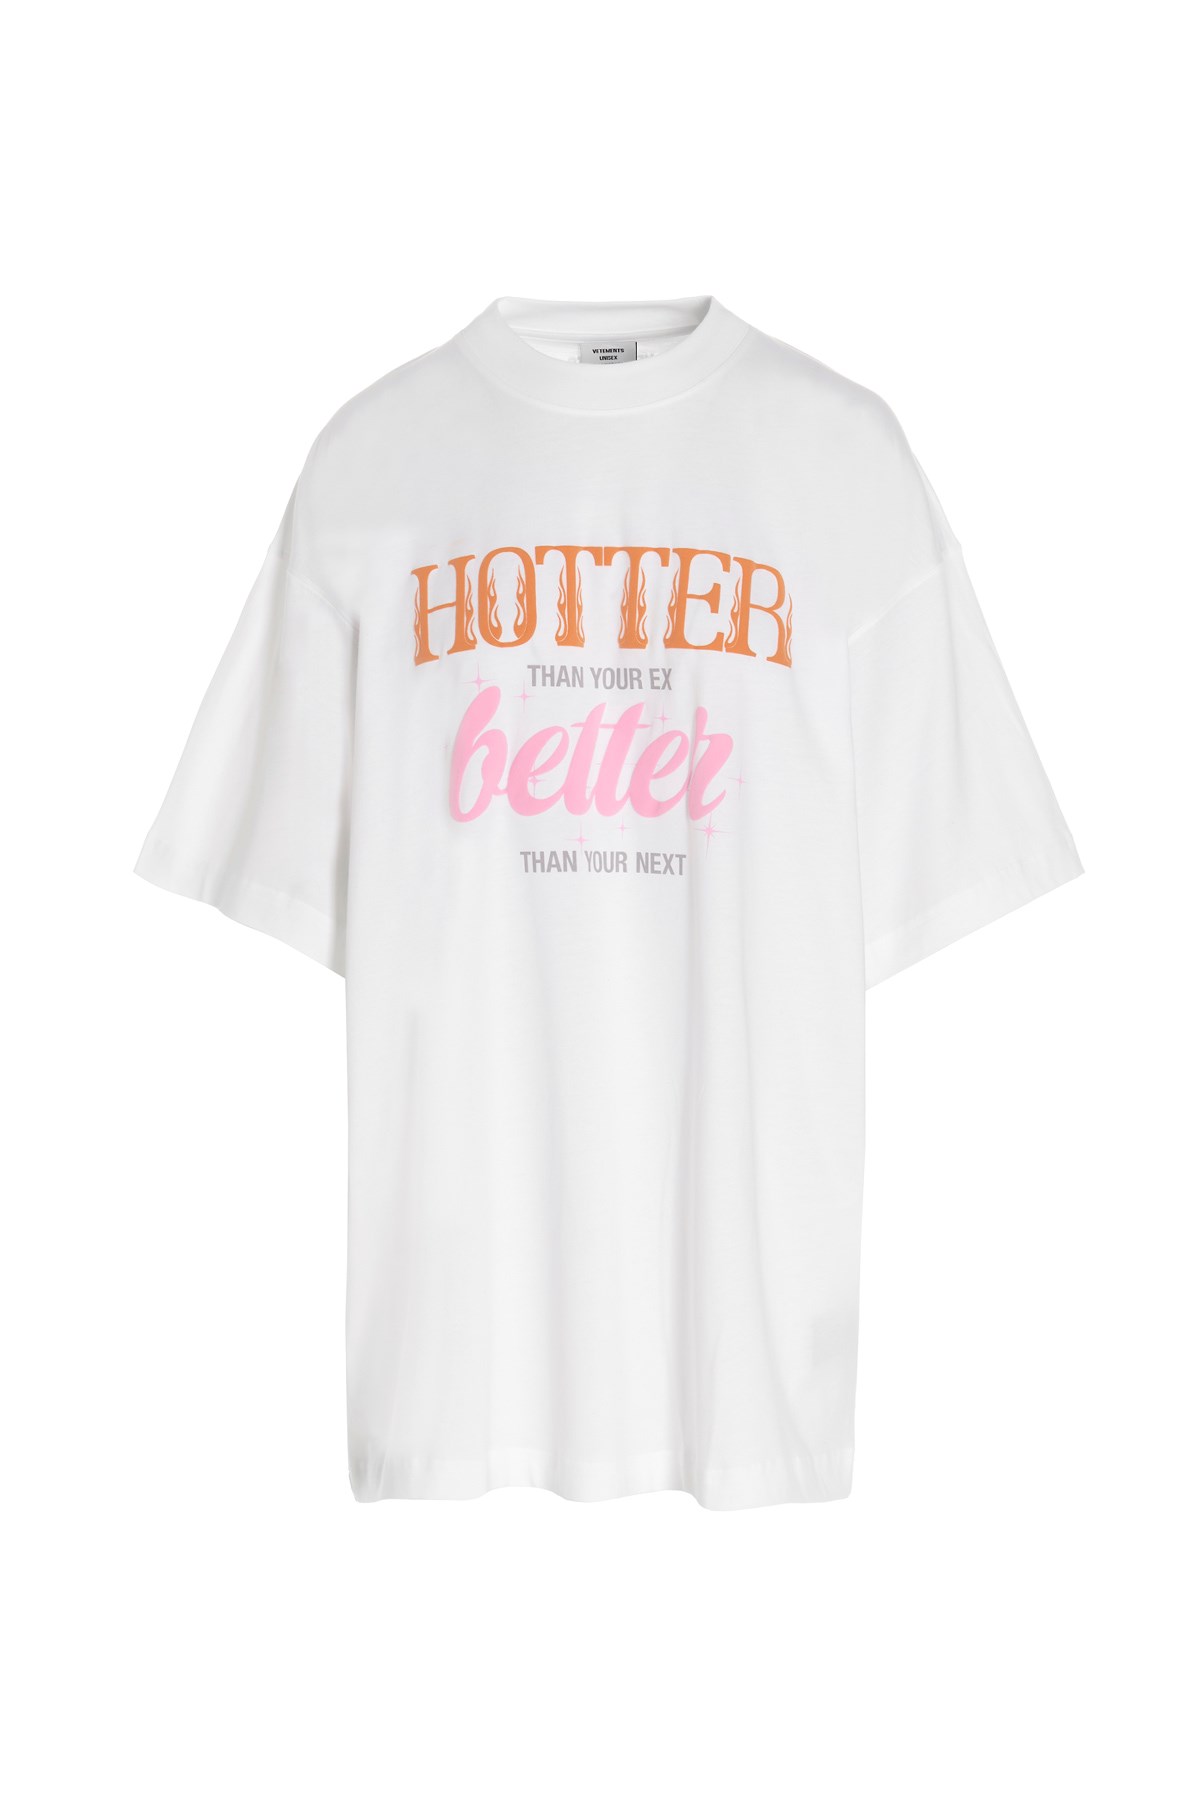 VETEMENTS 'Hotter Than Your Ex’ T-Shirt